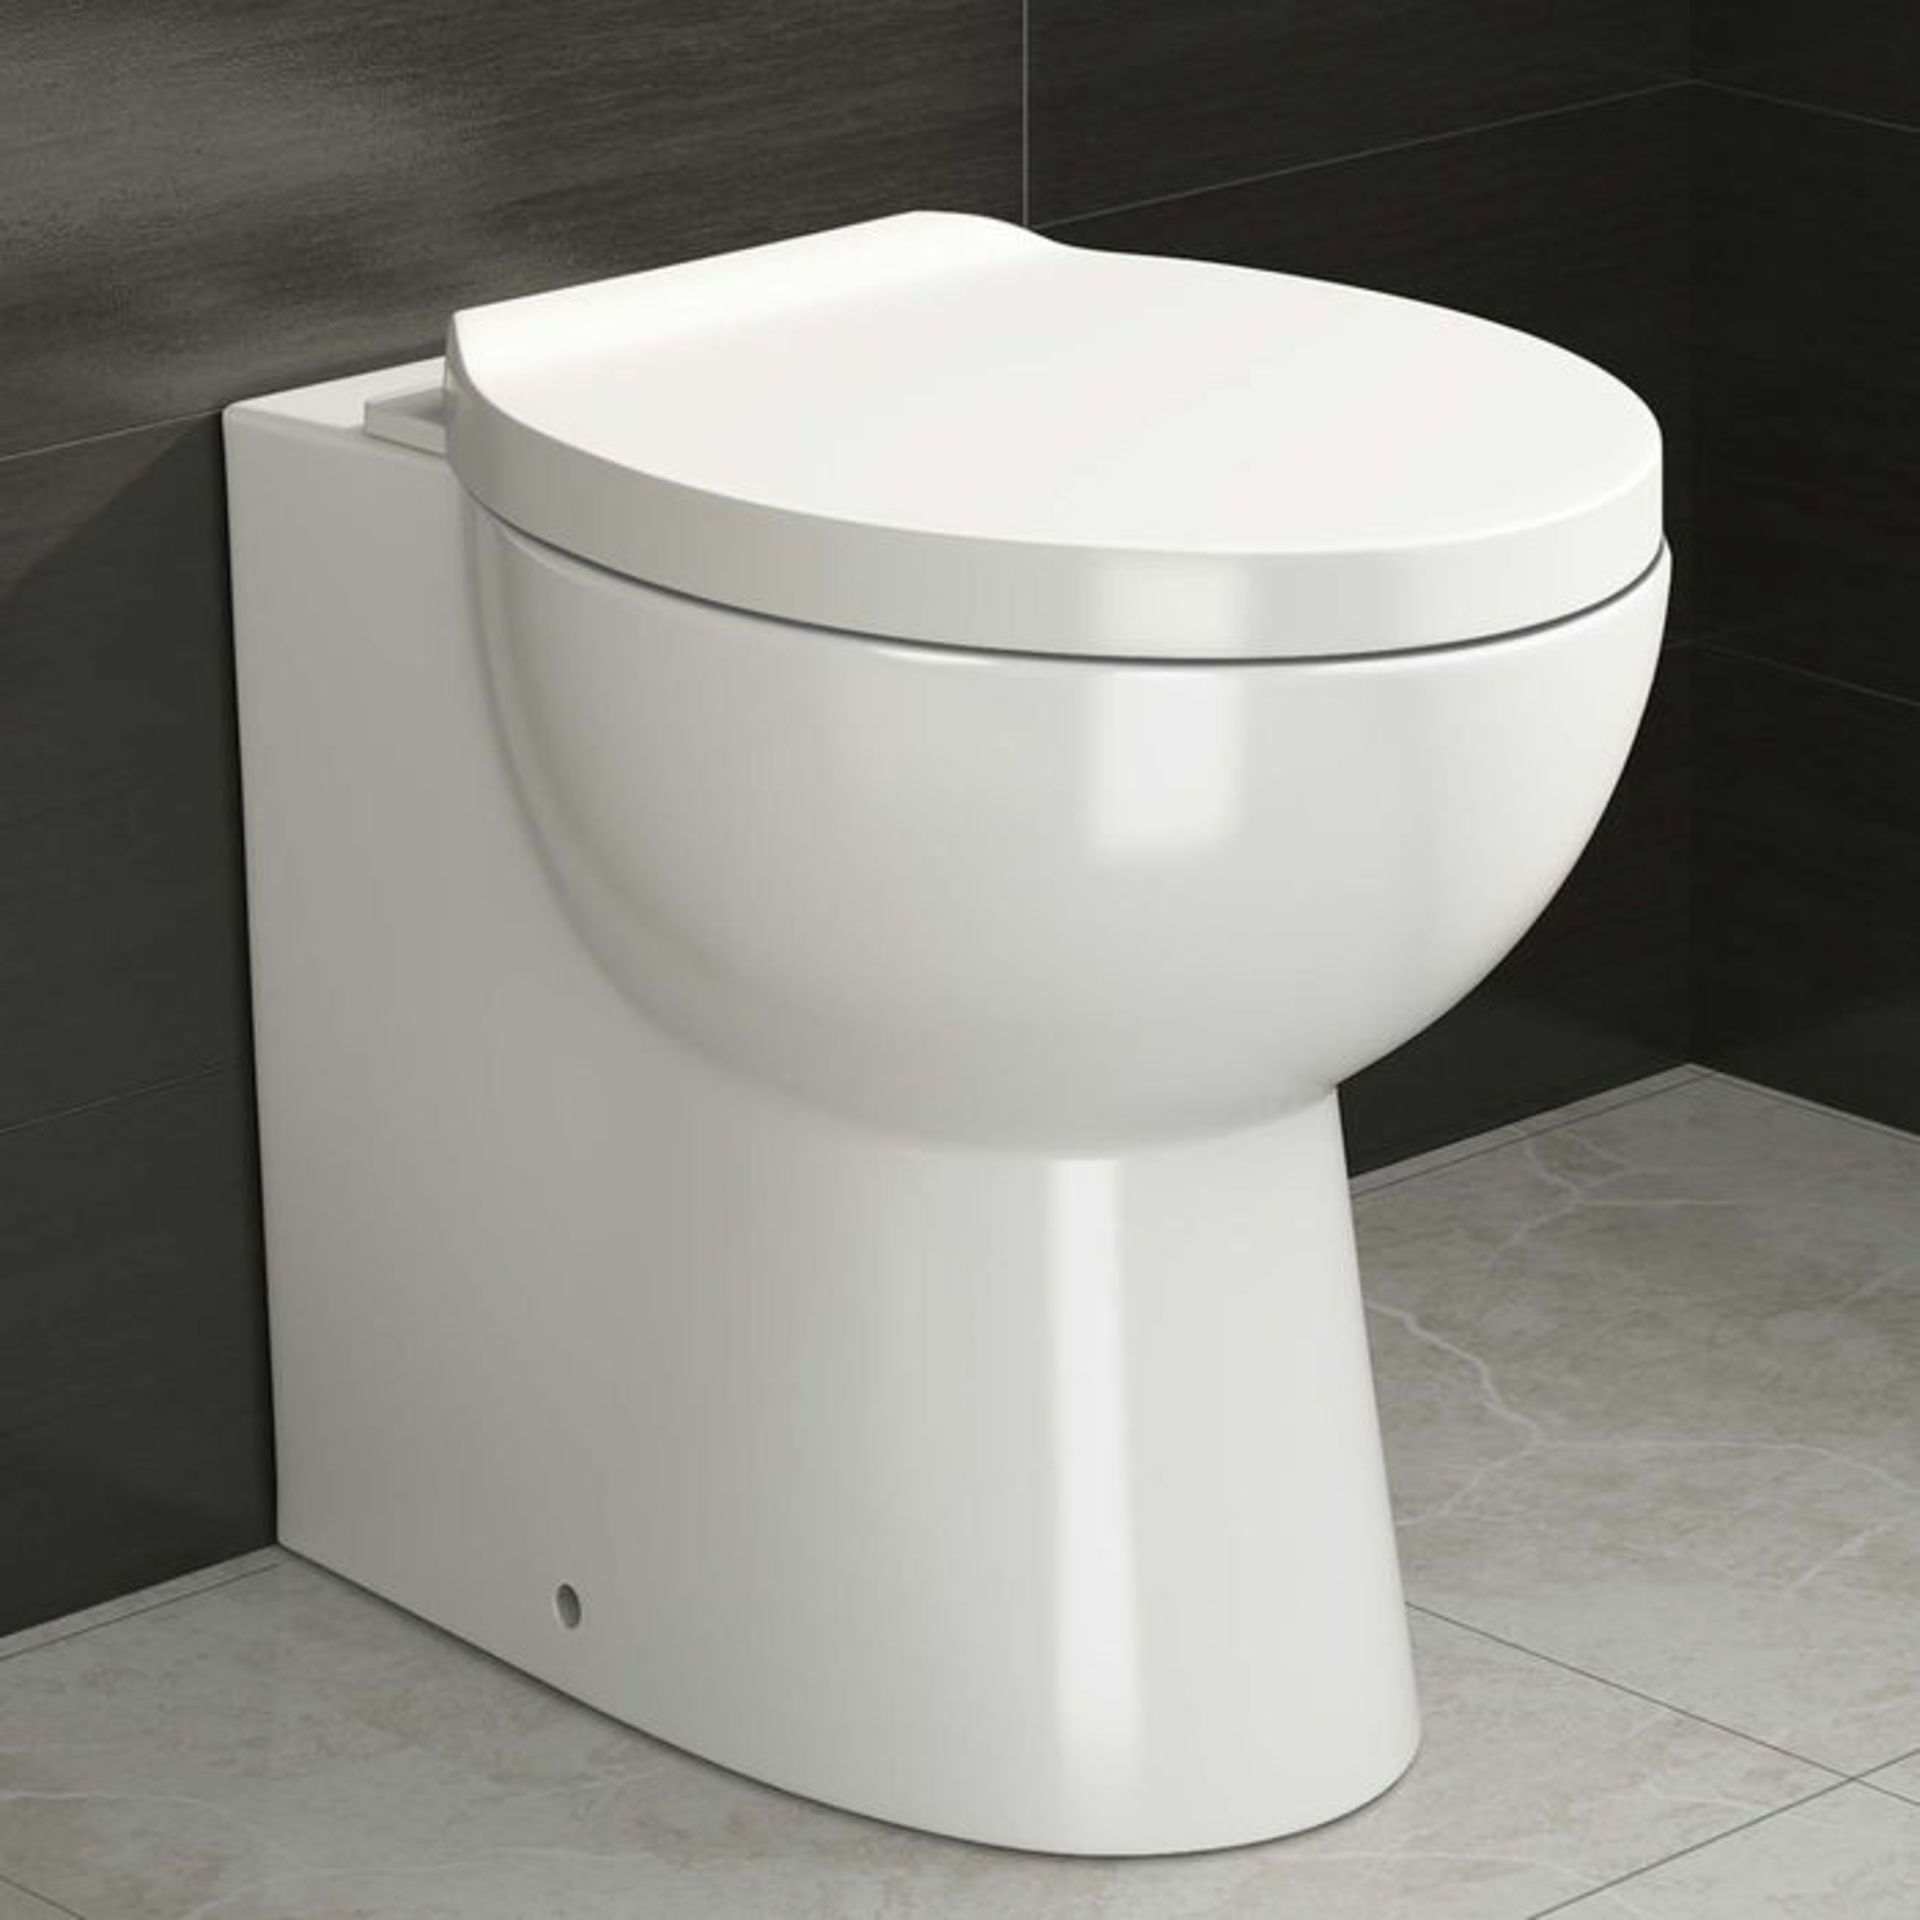 (S93) Crosby Back to Wall Toilet inc Soft Close Seat. Made from White Vitreous China Finished in a